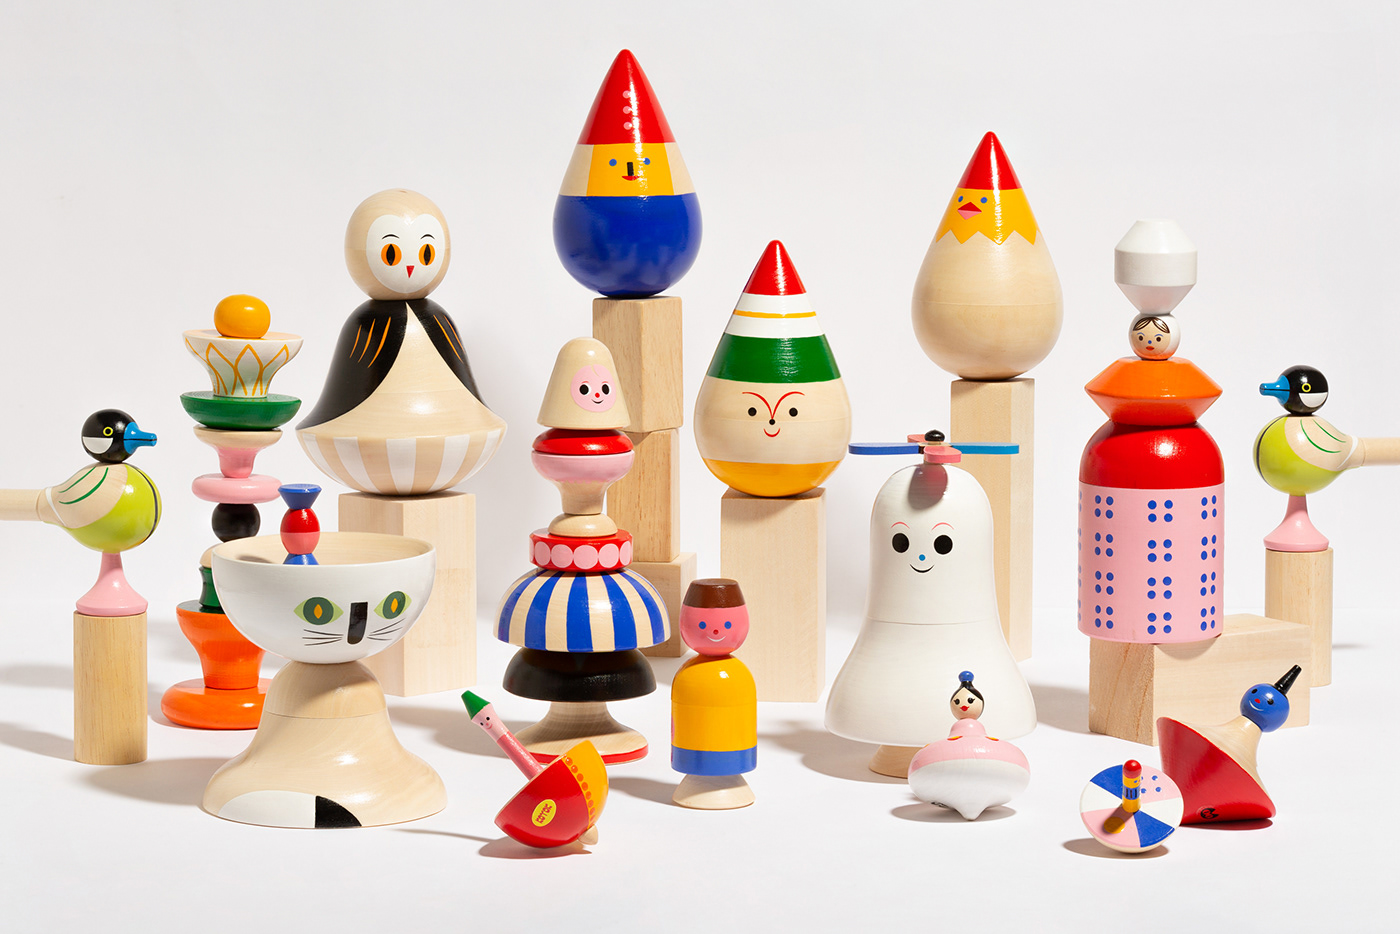 branding  Character design  crafts   design toys folk art home decor Russia Wooden Art wooden toys collectibles